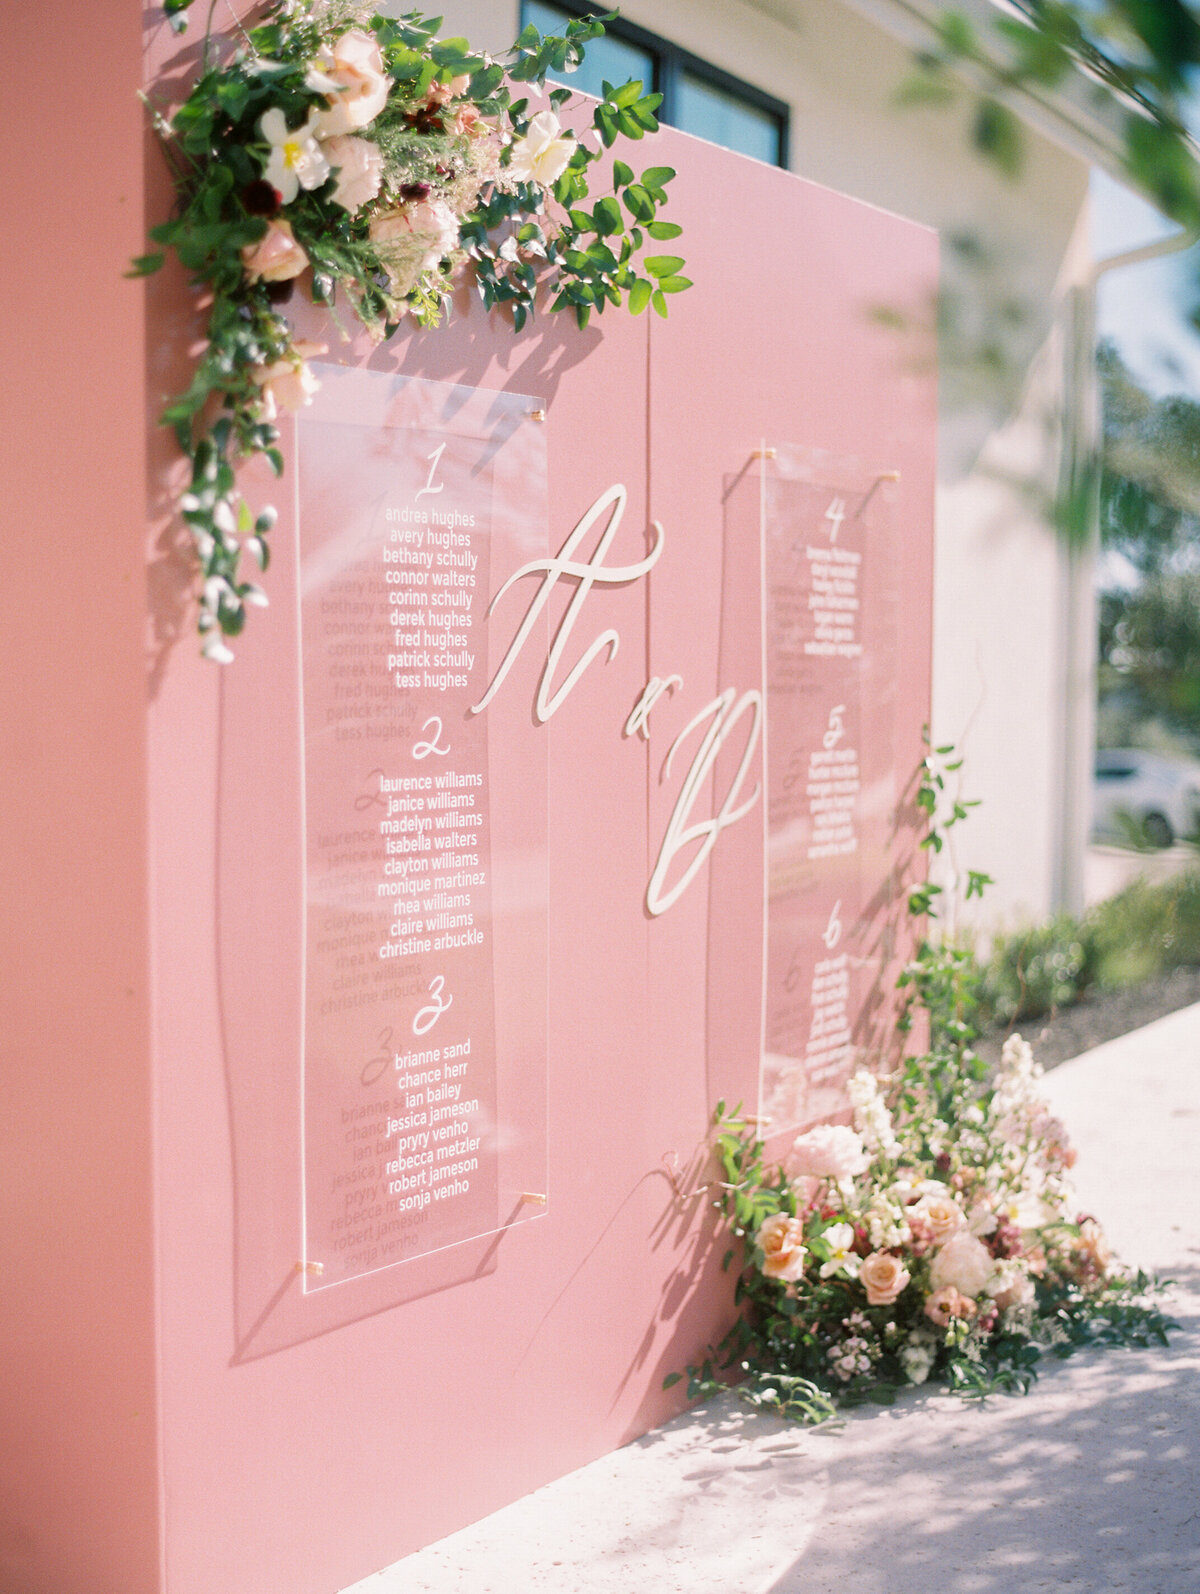 LBV Design House Wedding Design Planning Day-Of Signage Paper Goods Shoppable Accessories Wedding Day Austin, Texas beyond Valerie Strenk Lettered by Valerie Hand Lettering20